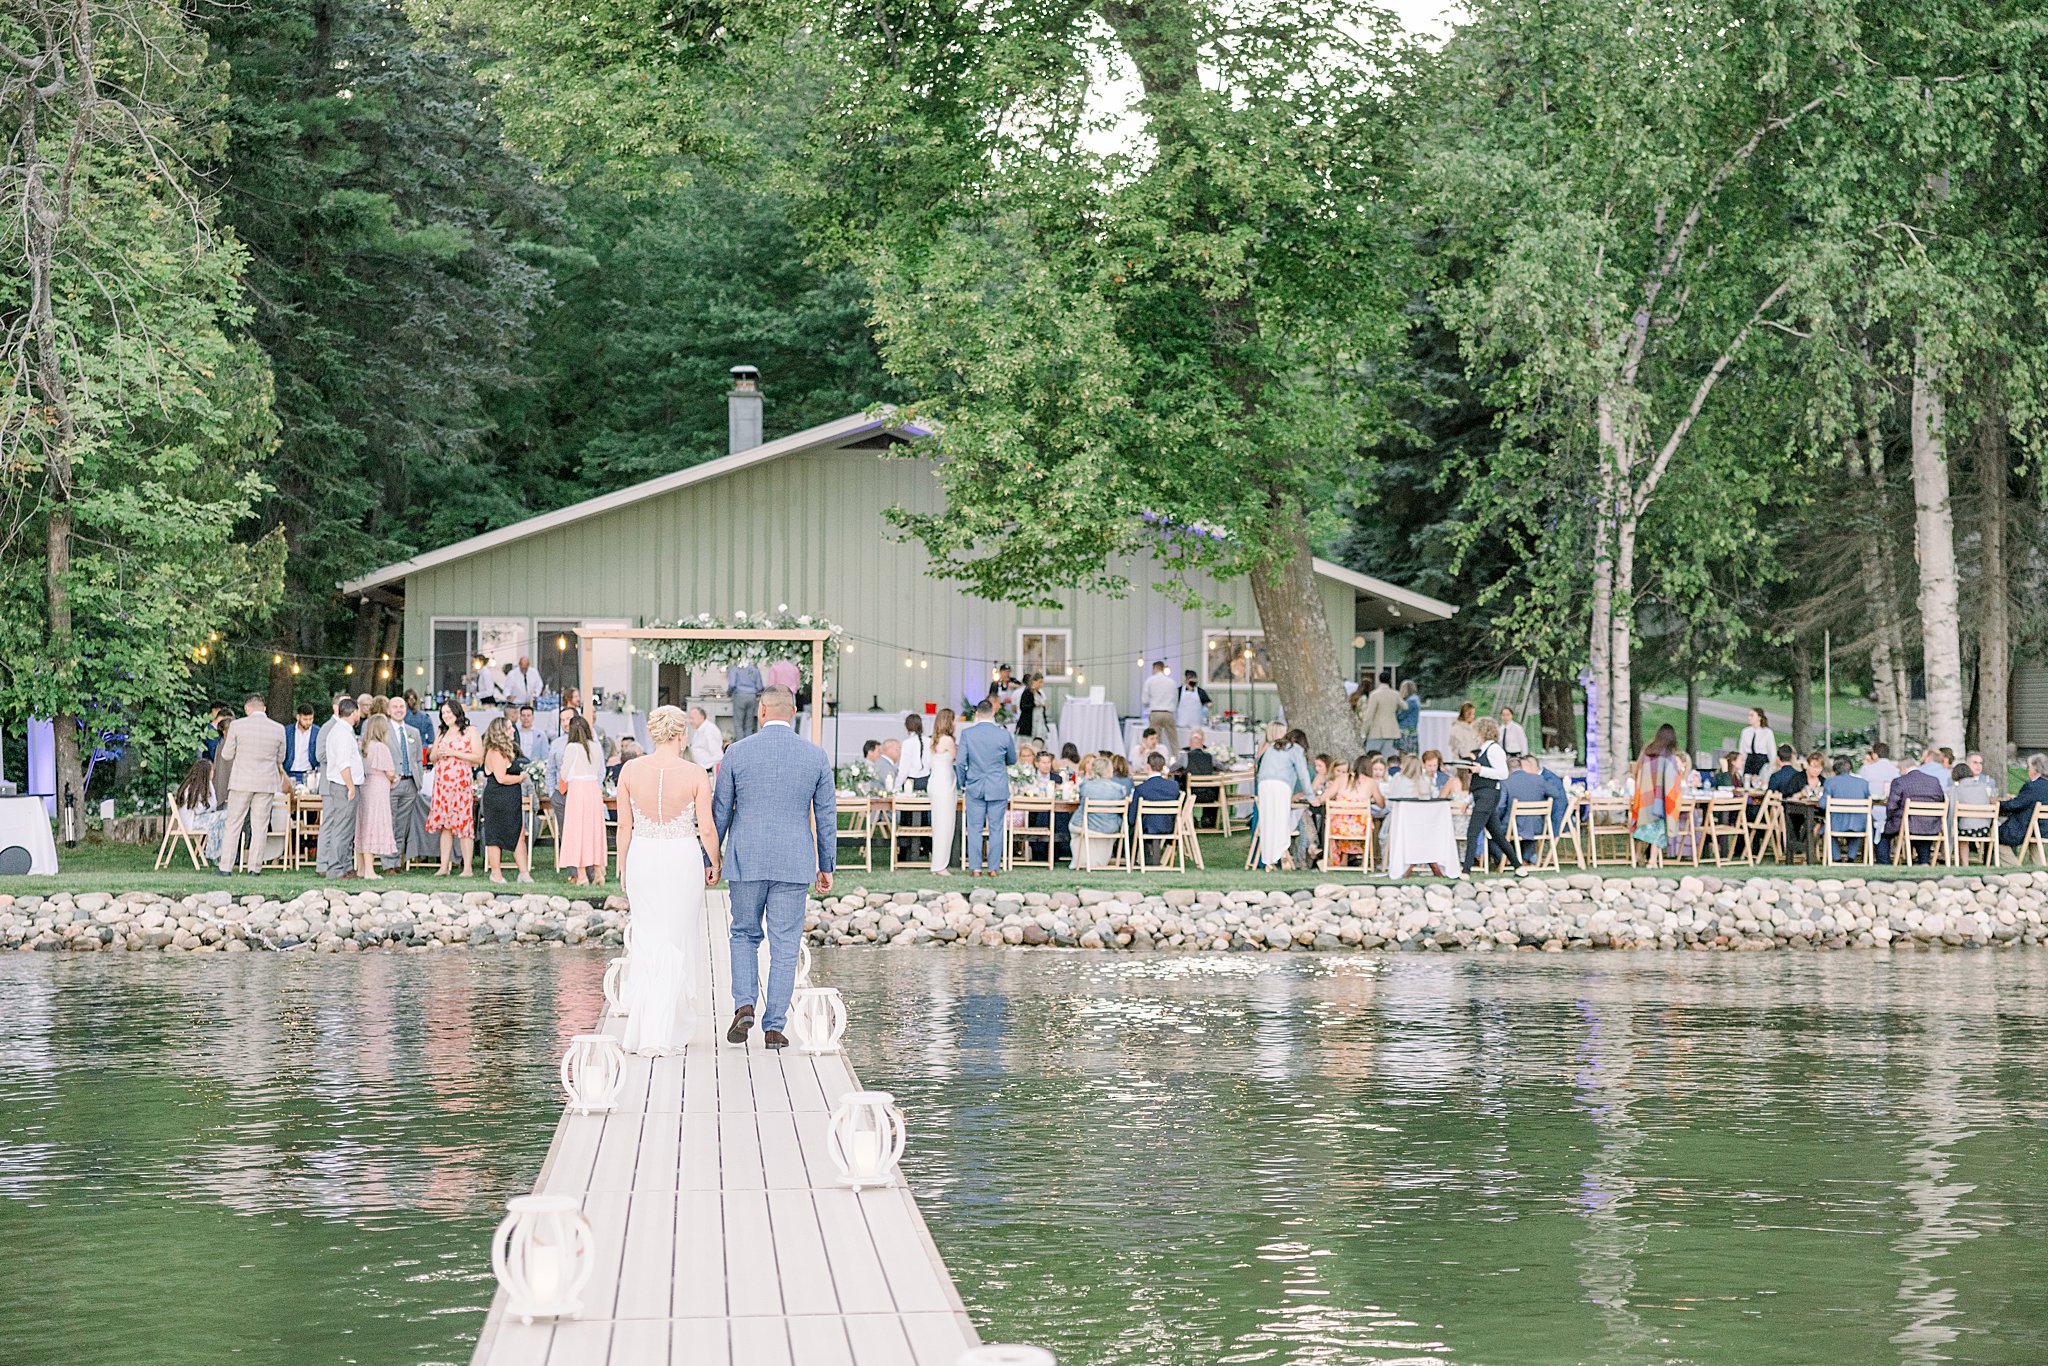 Bride and groom walk down dock to return to their wedding reception after enjoying some time together during their lakeside wedding on the shores of Burt Lake in Northern MIchigan.